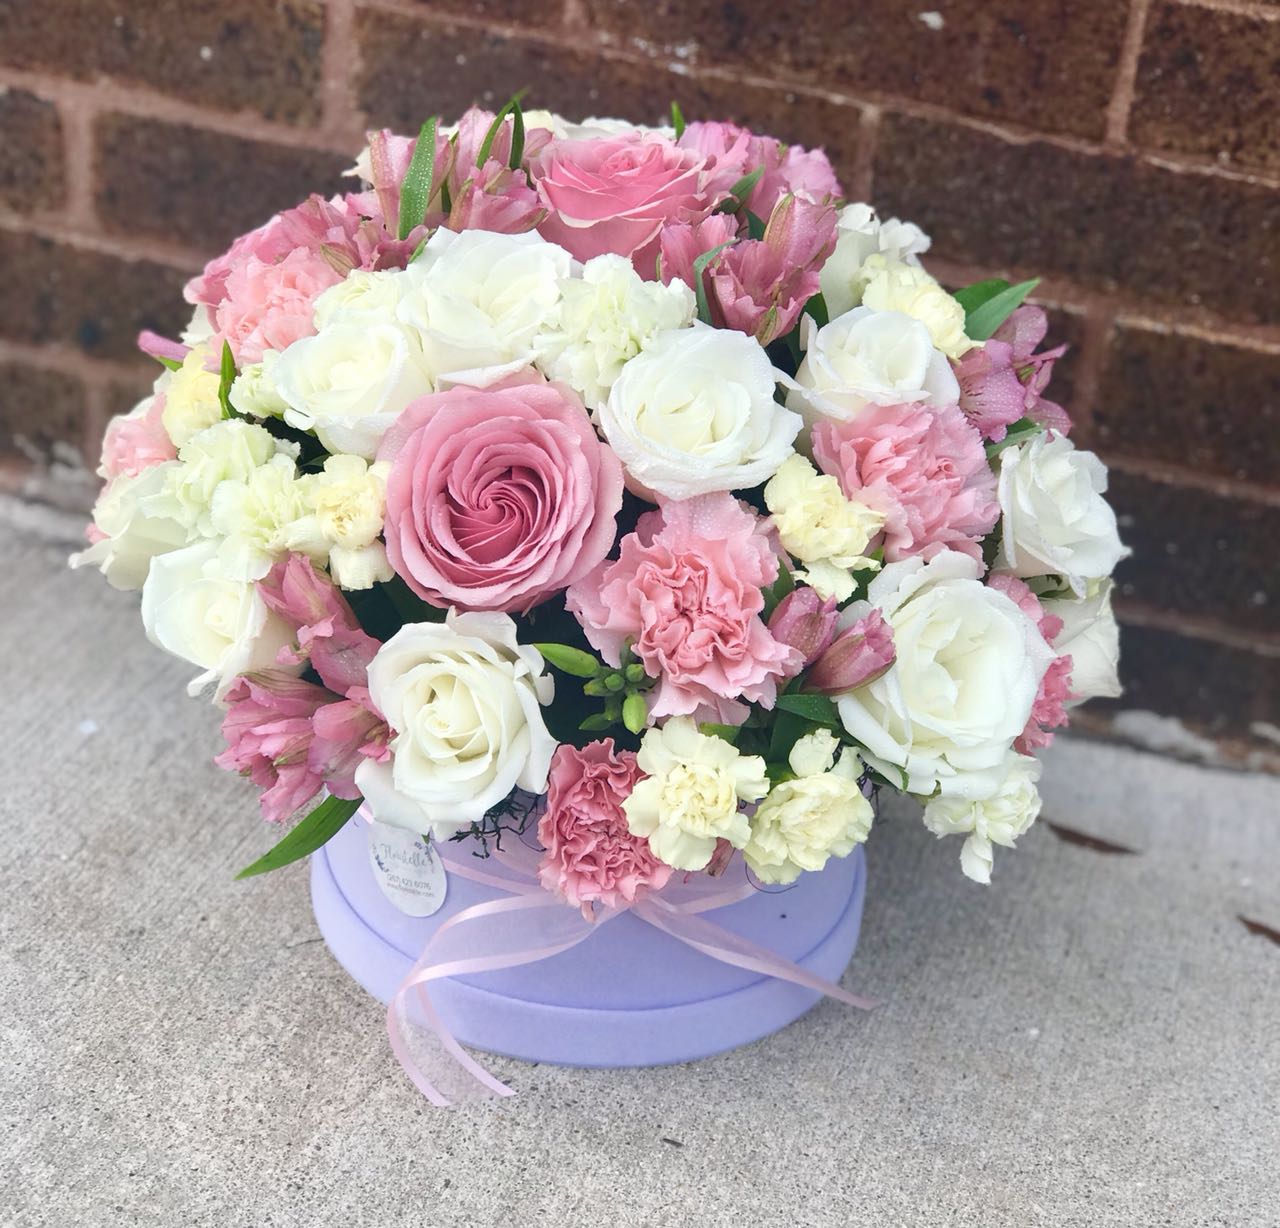 A stunning orchid flower box with vibrant flowers. The perfect gift for birthday, baby shower, wedding.  Includes:  Pink roses,white roses, pink alstroemerias, light yellow and green carnations. Velvet box Free message card